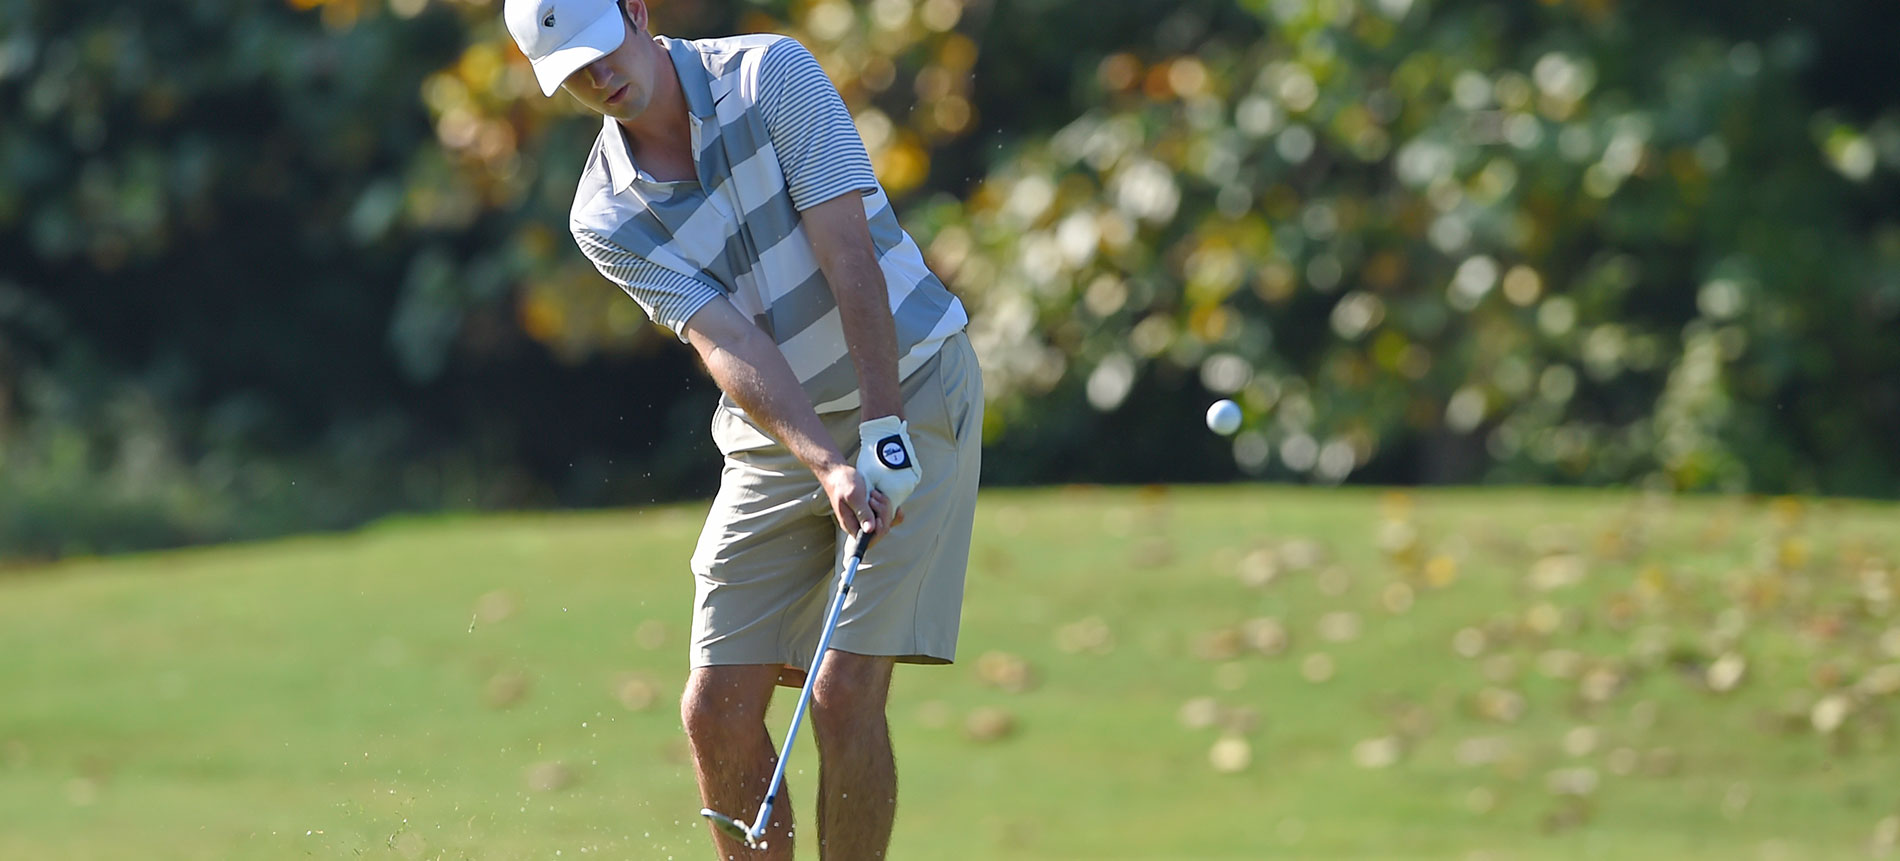 Men’s Golf Tied for 10th Place after First Round of Donald Ross Intercollegiate